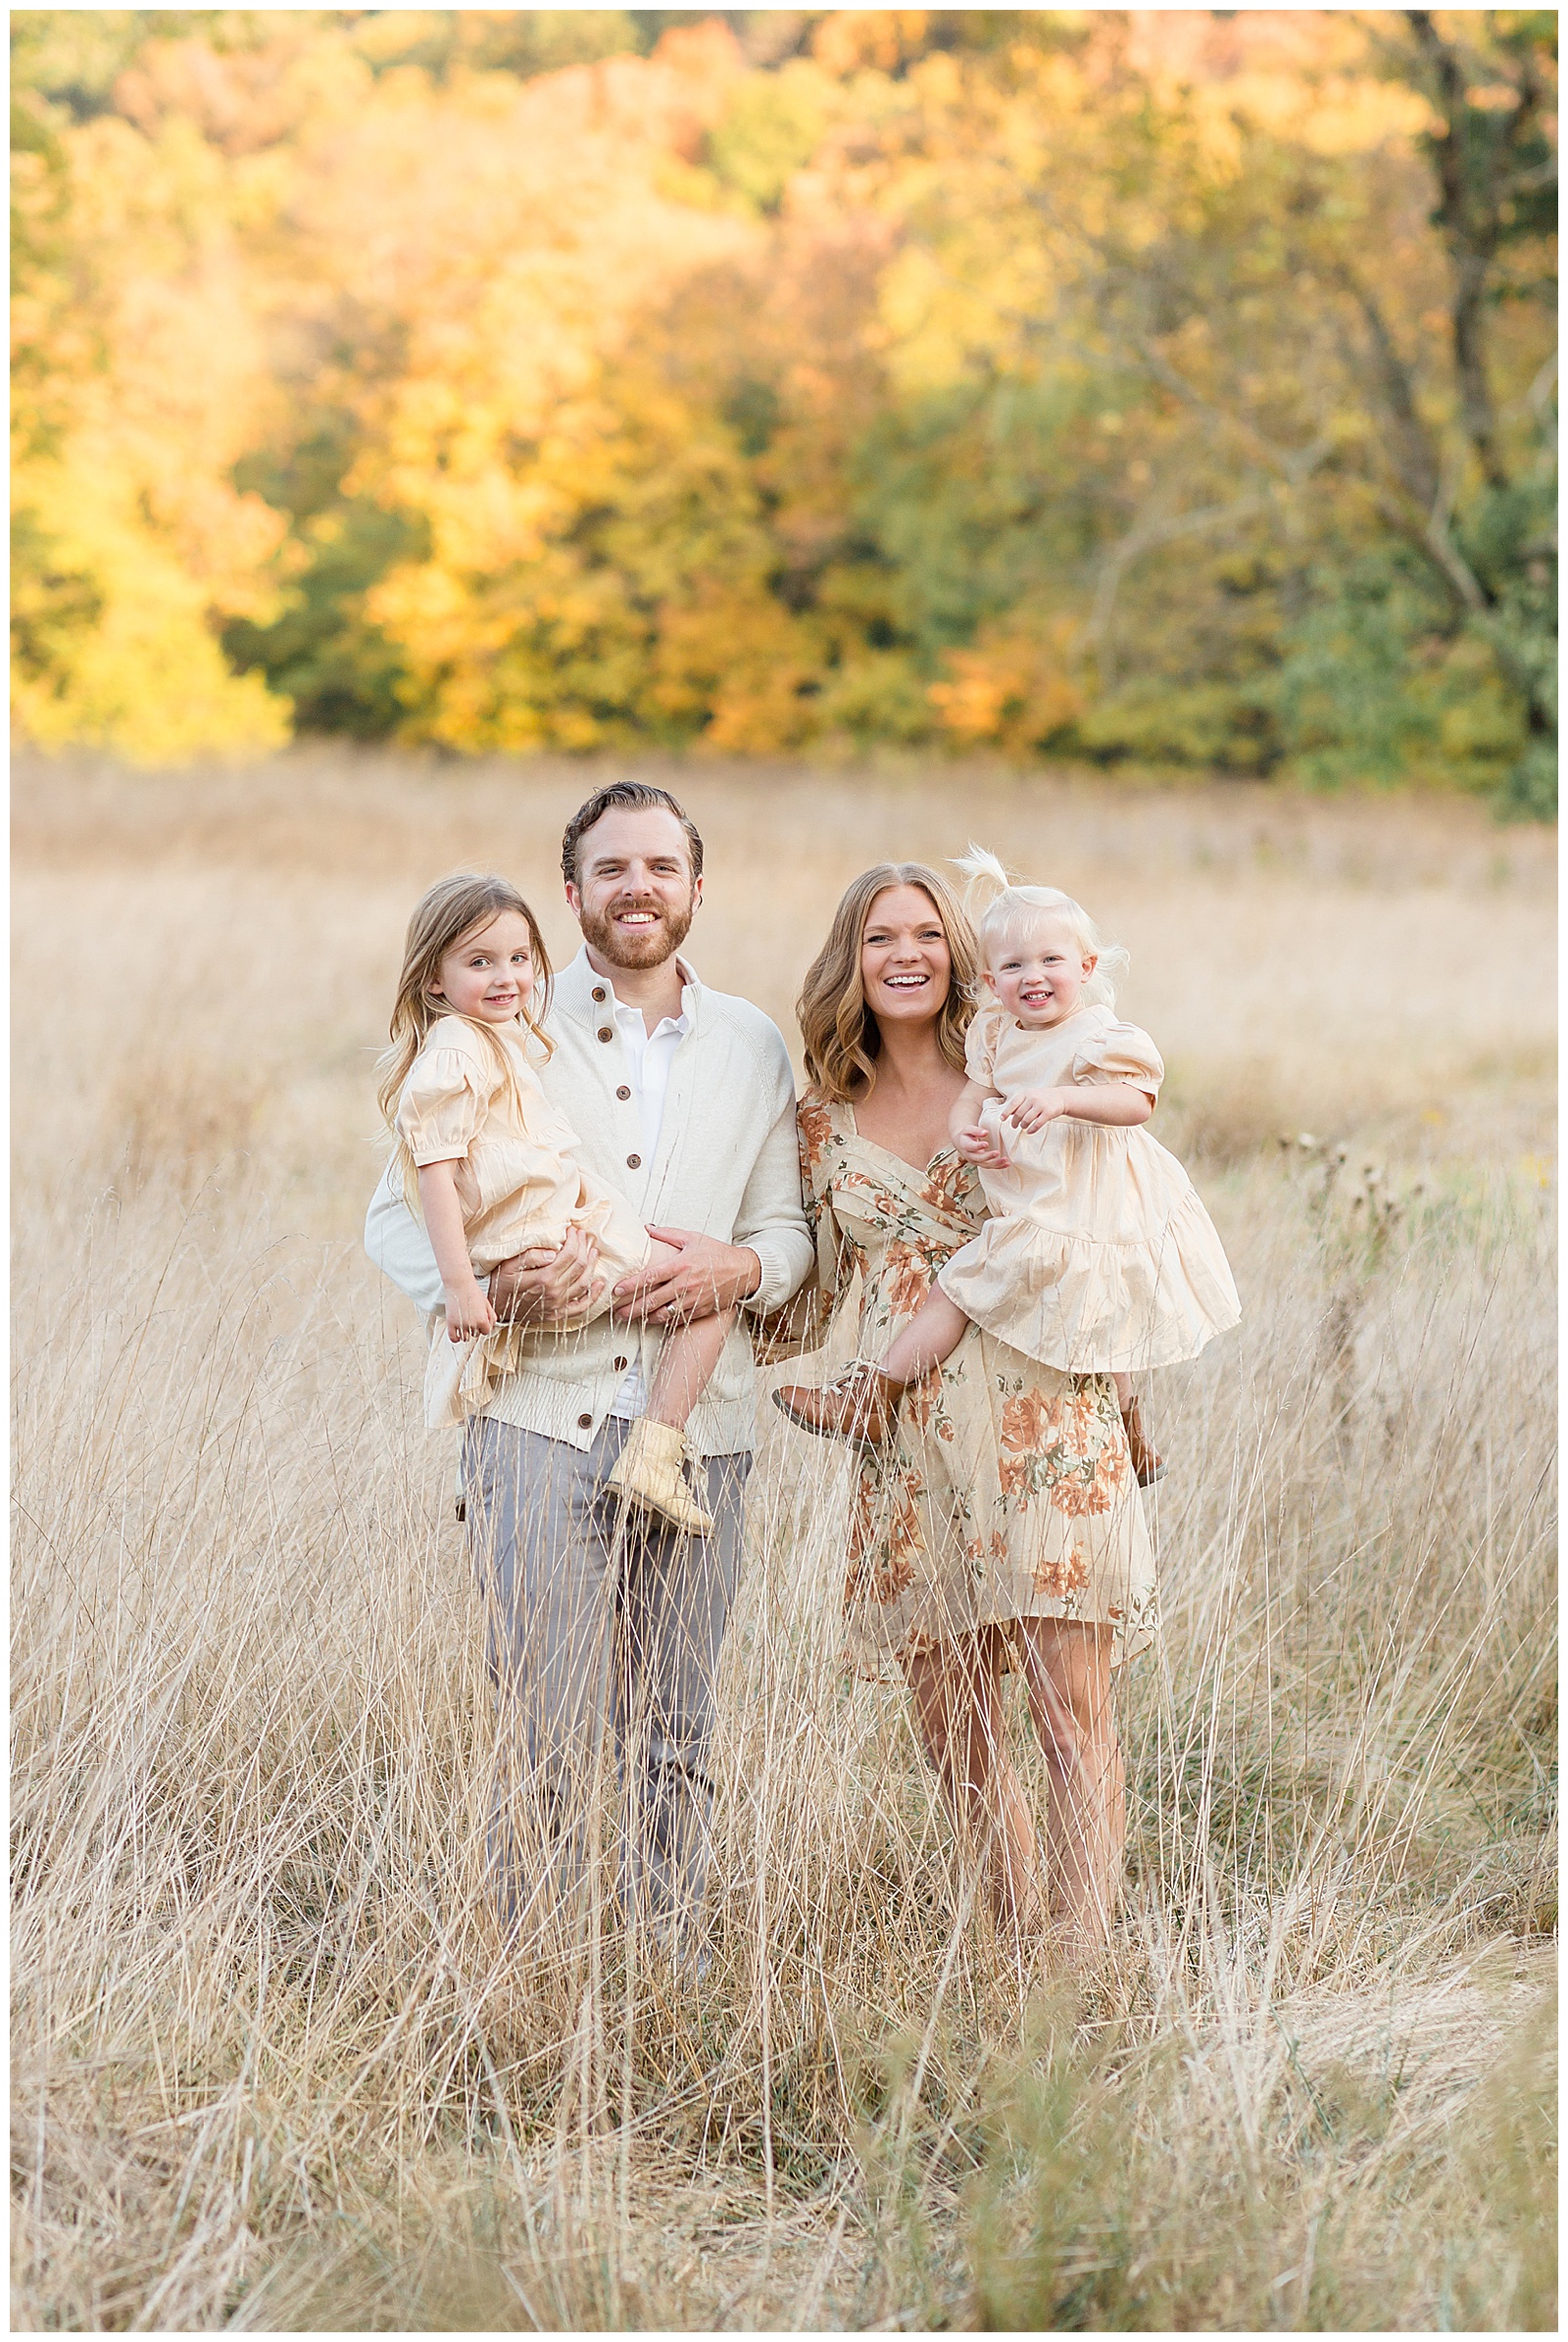 Family of 4 with two toddler daughters, are being held by Mom and Dad in a field in Nashville during their family session.  They wear neutral colors that blend in beautifully with the tall grass field as the sun highlights the trees behind them.